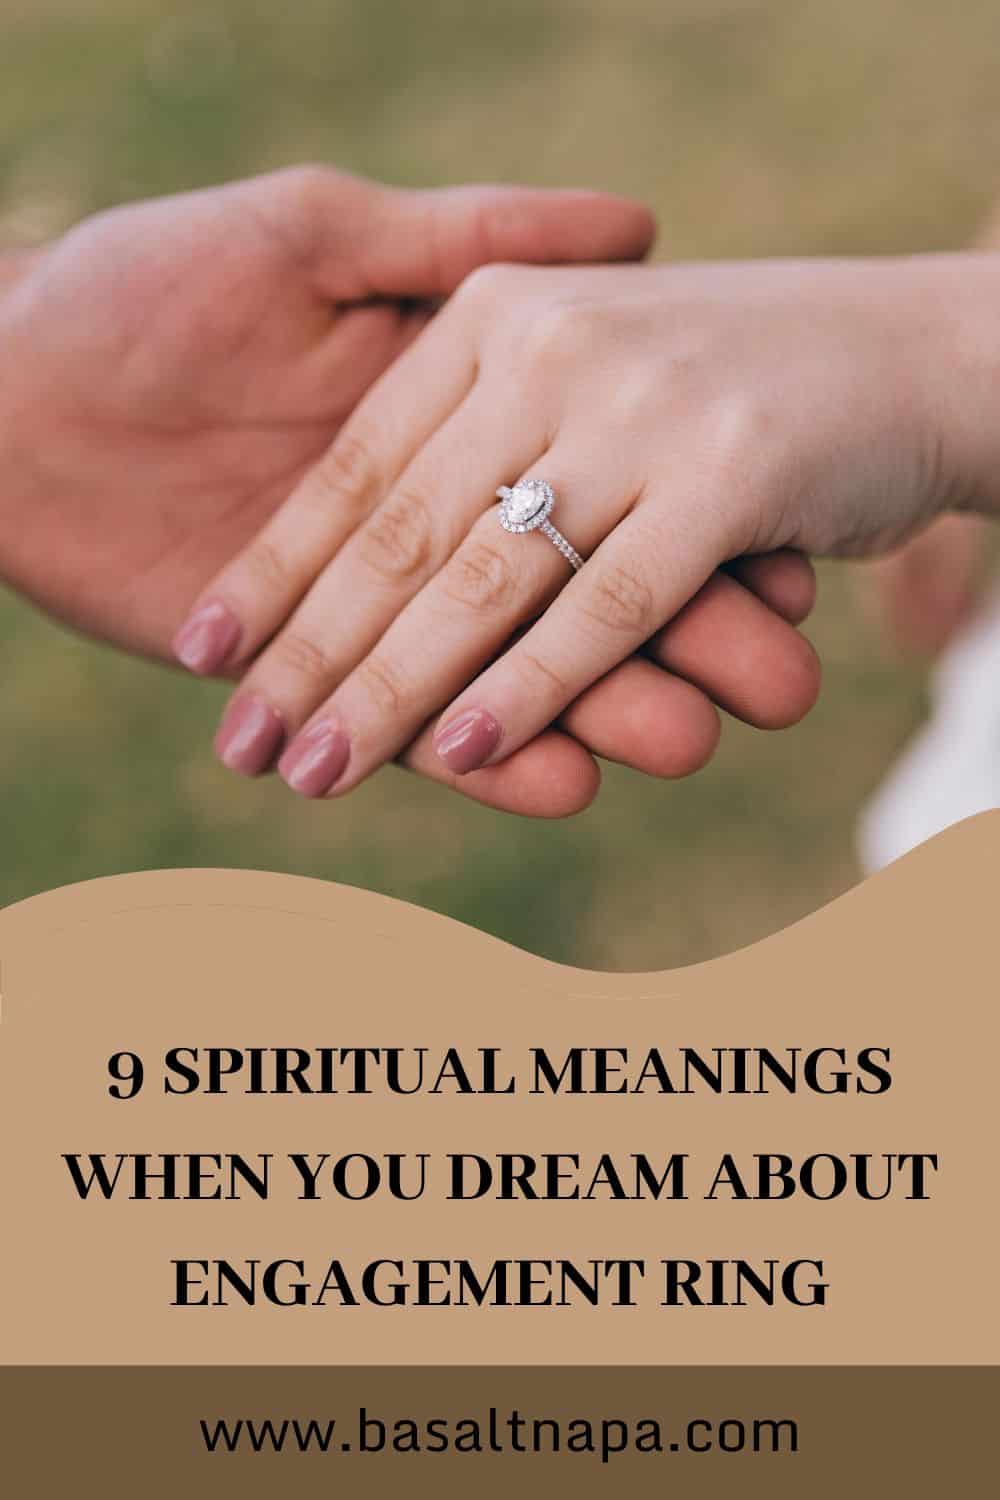 What does it mean when you dream about an engagement ring?